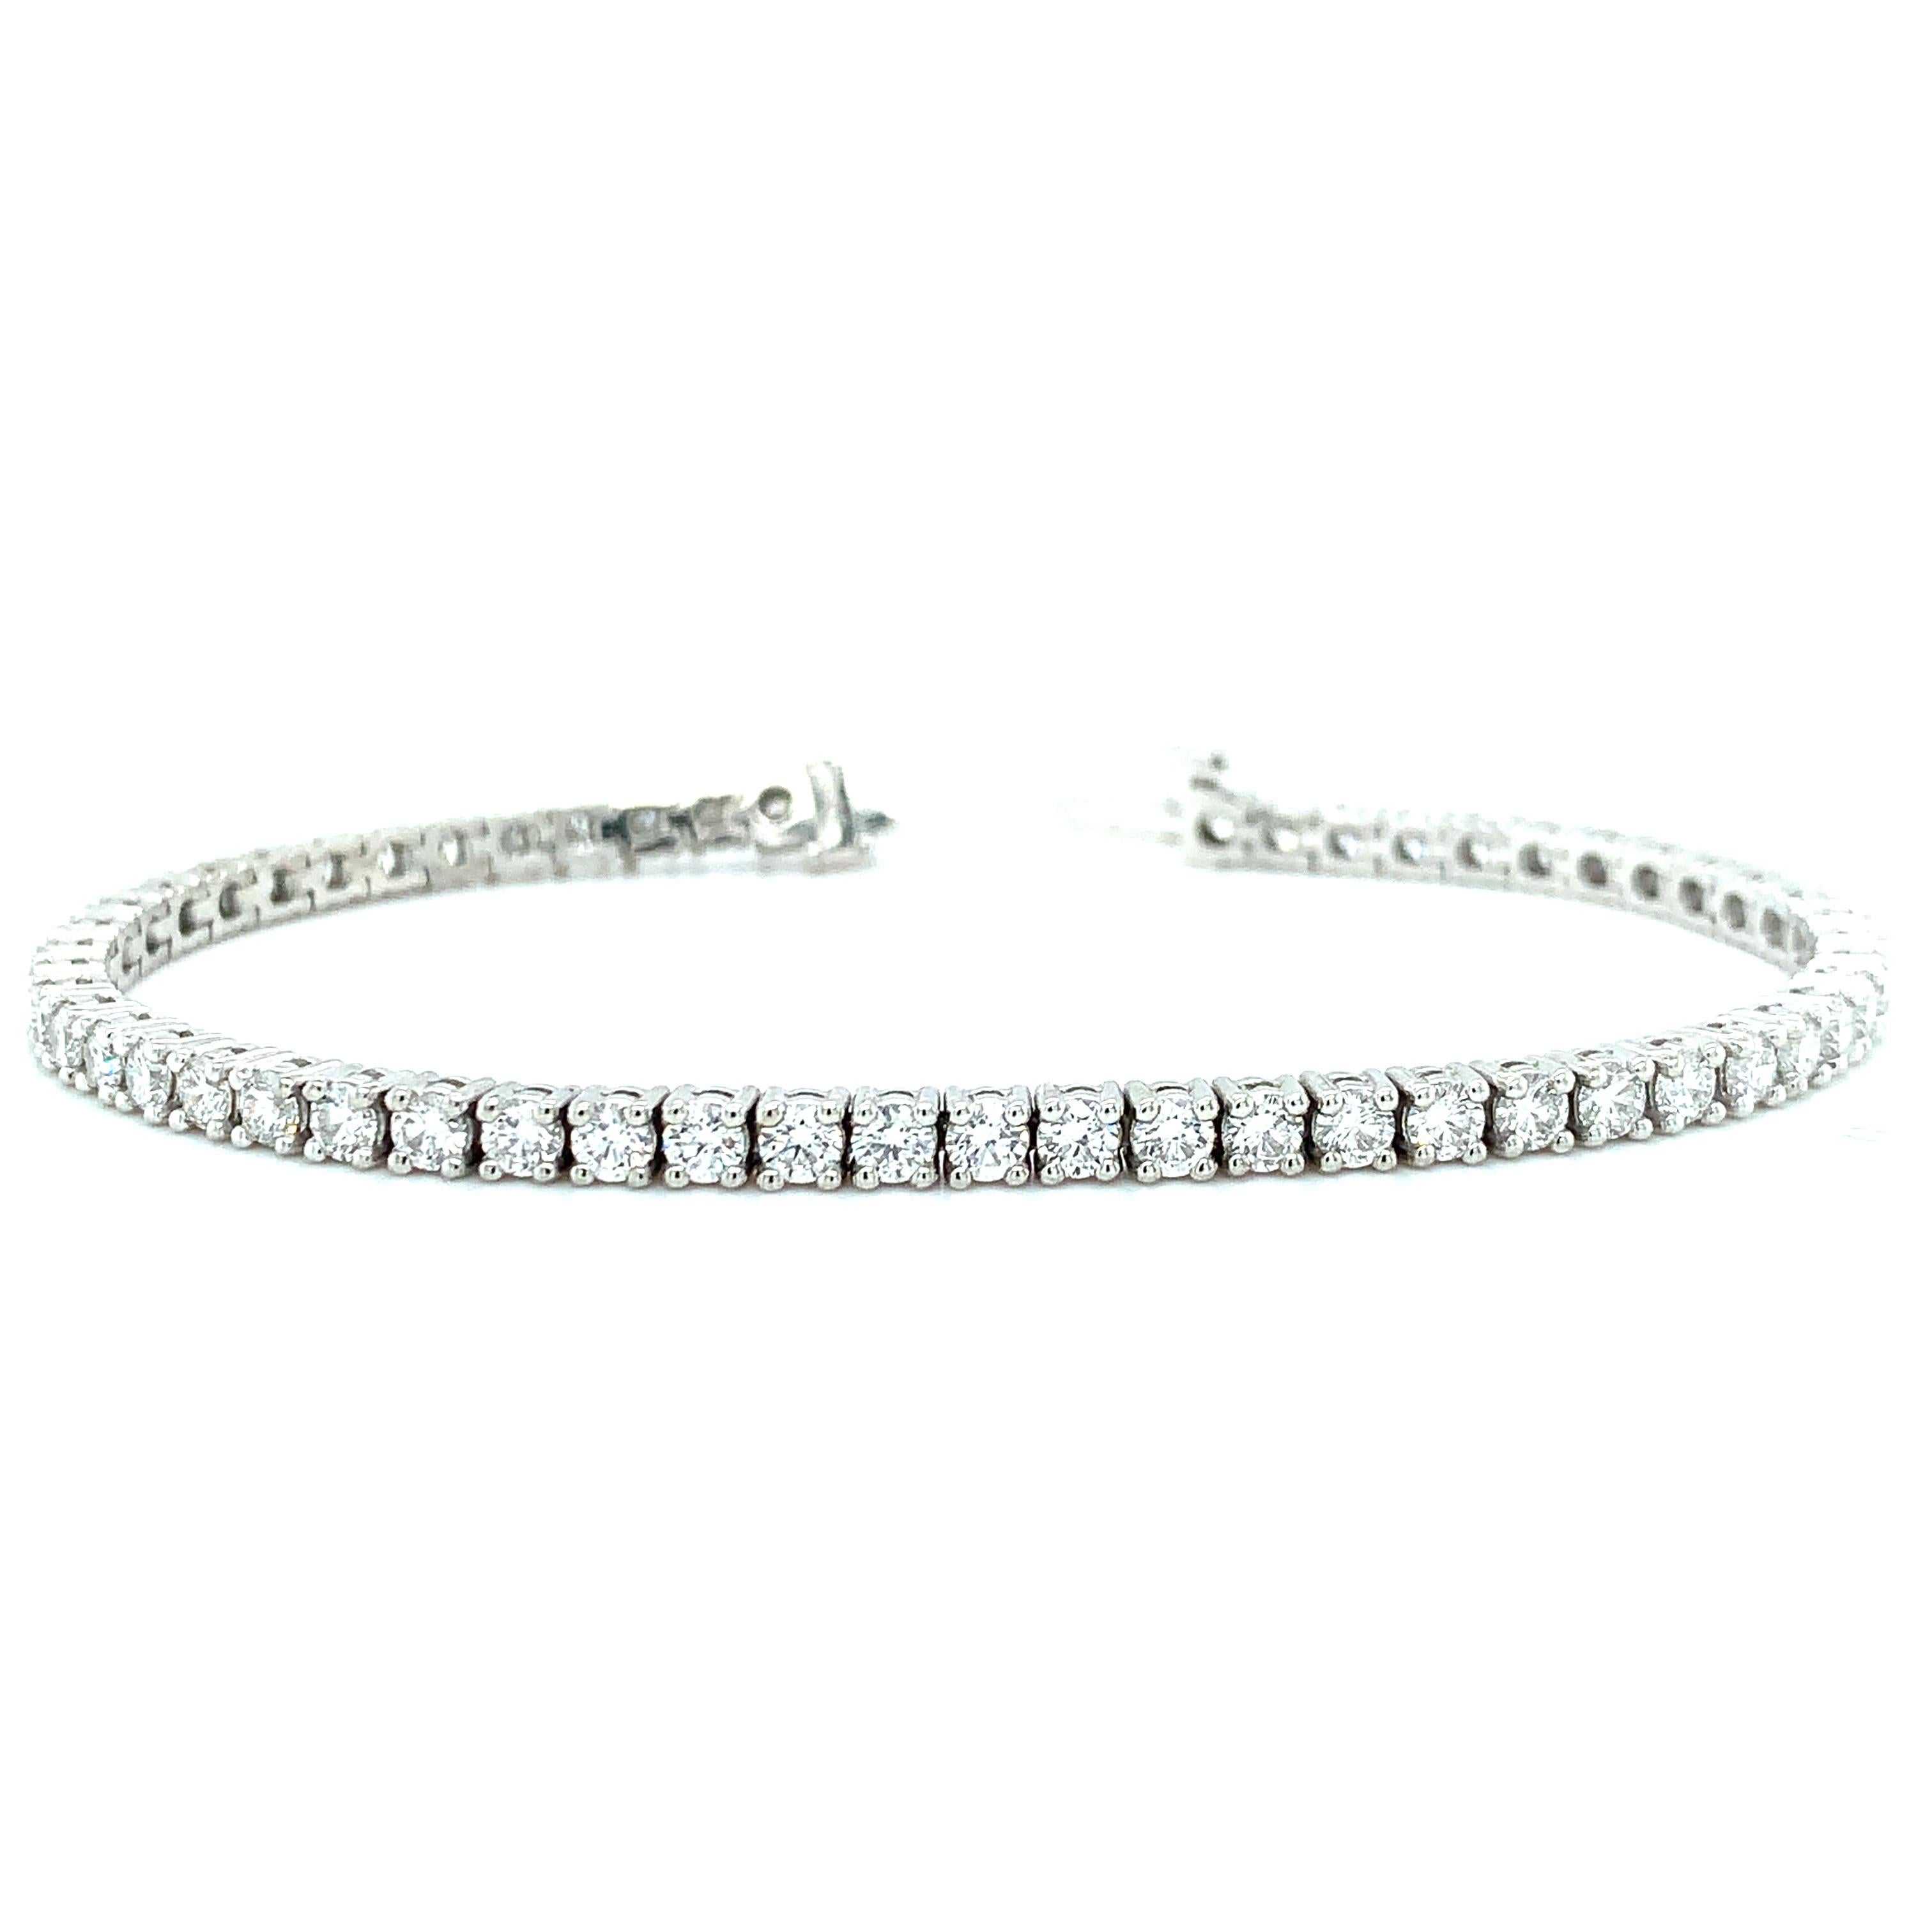 This stunning tennis bracelet is set with nearly four and half carats of gorgeous, sparkling diamonds! Set in all platinum, each of the diamonds has been hand-selected and matched for size and quality. Each stone is extremely well-cut for maximum